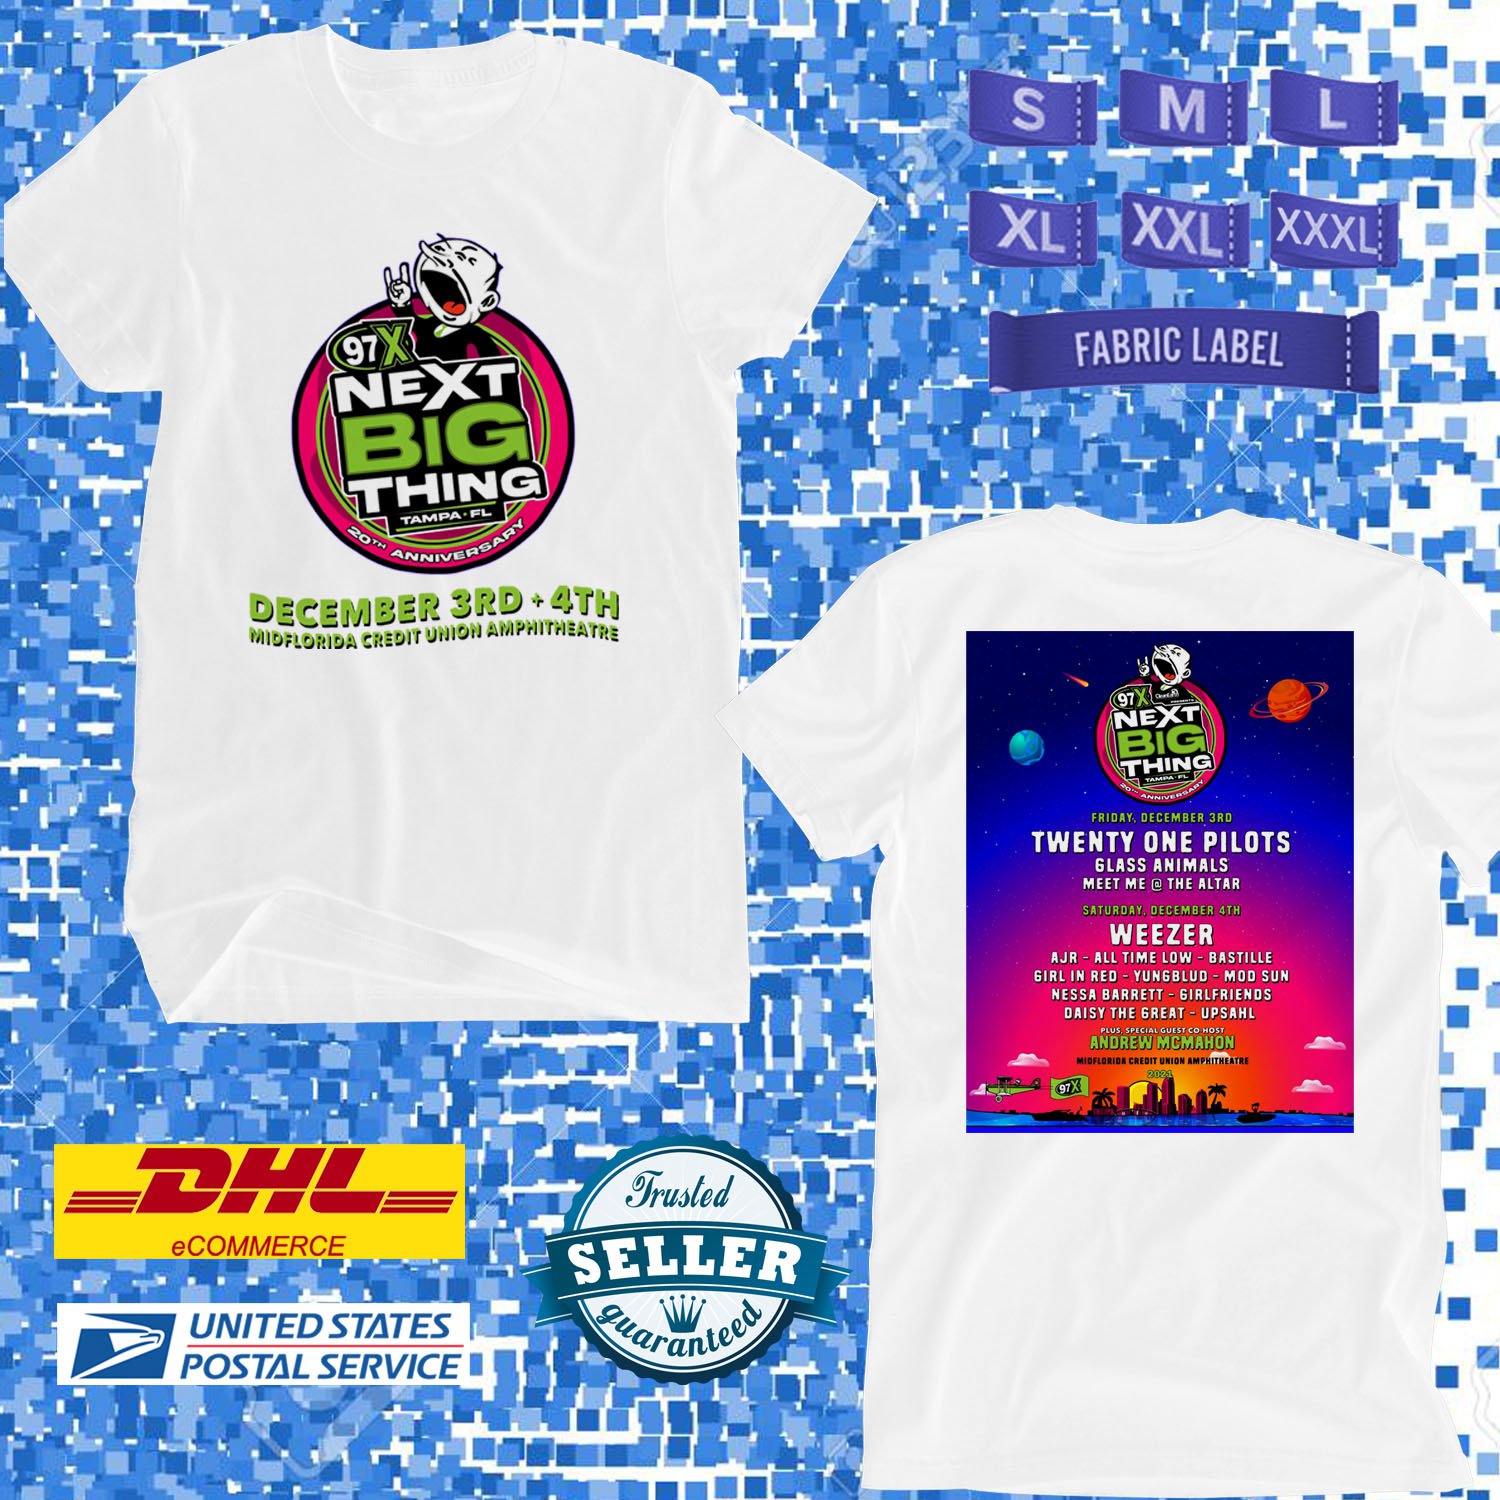 FESTIVAL 2021 97X NEXT BIG THING WHITE TEE SHIRT WITH LINEUP CODE EP01